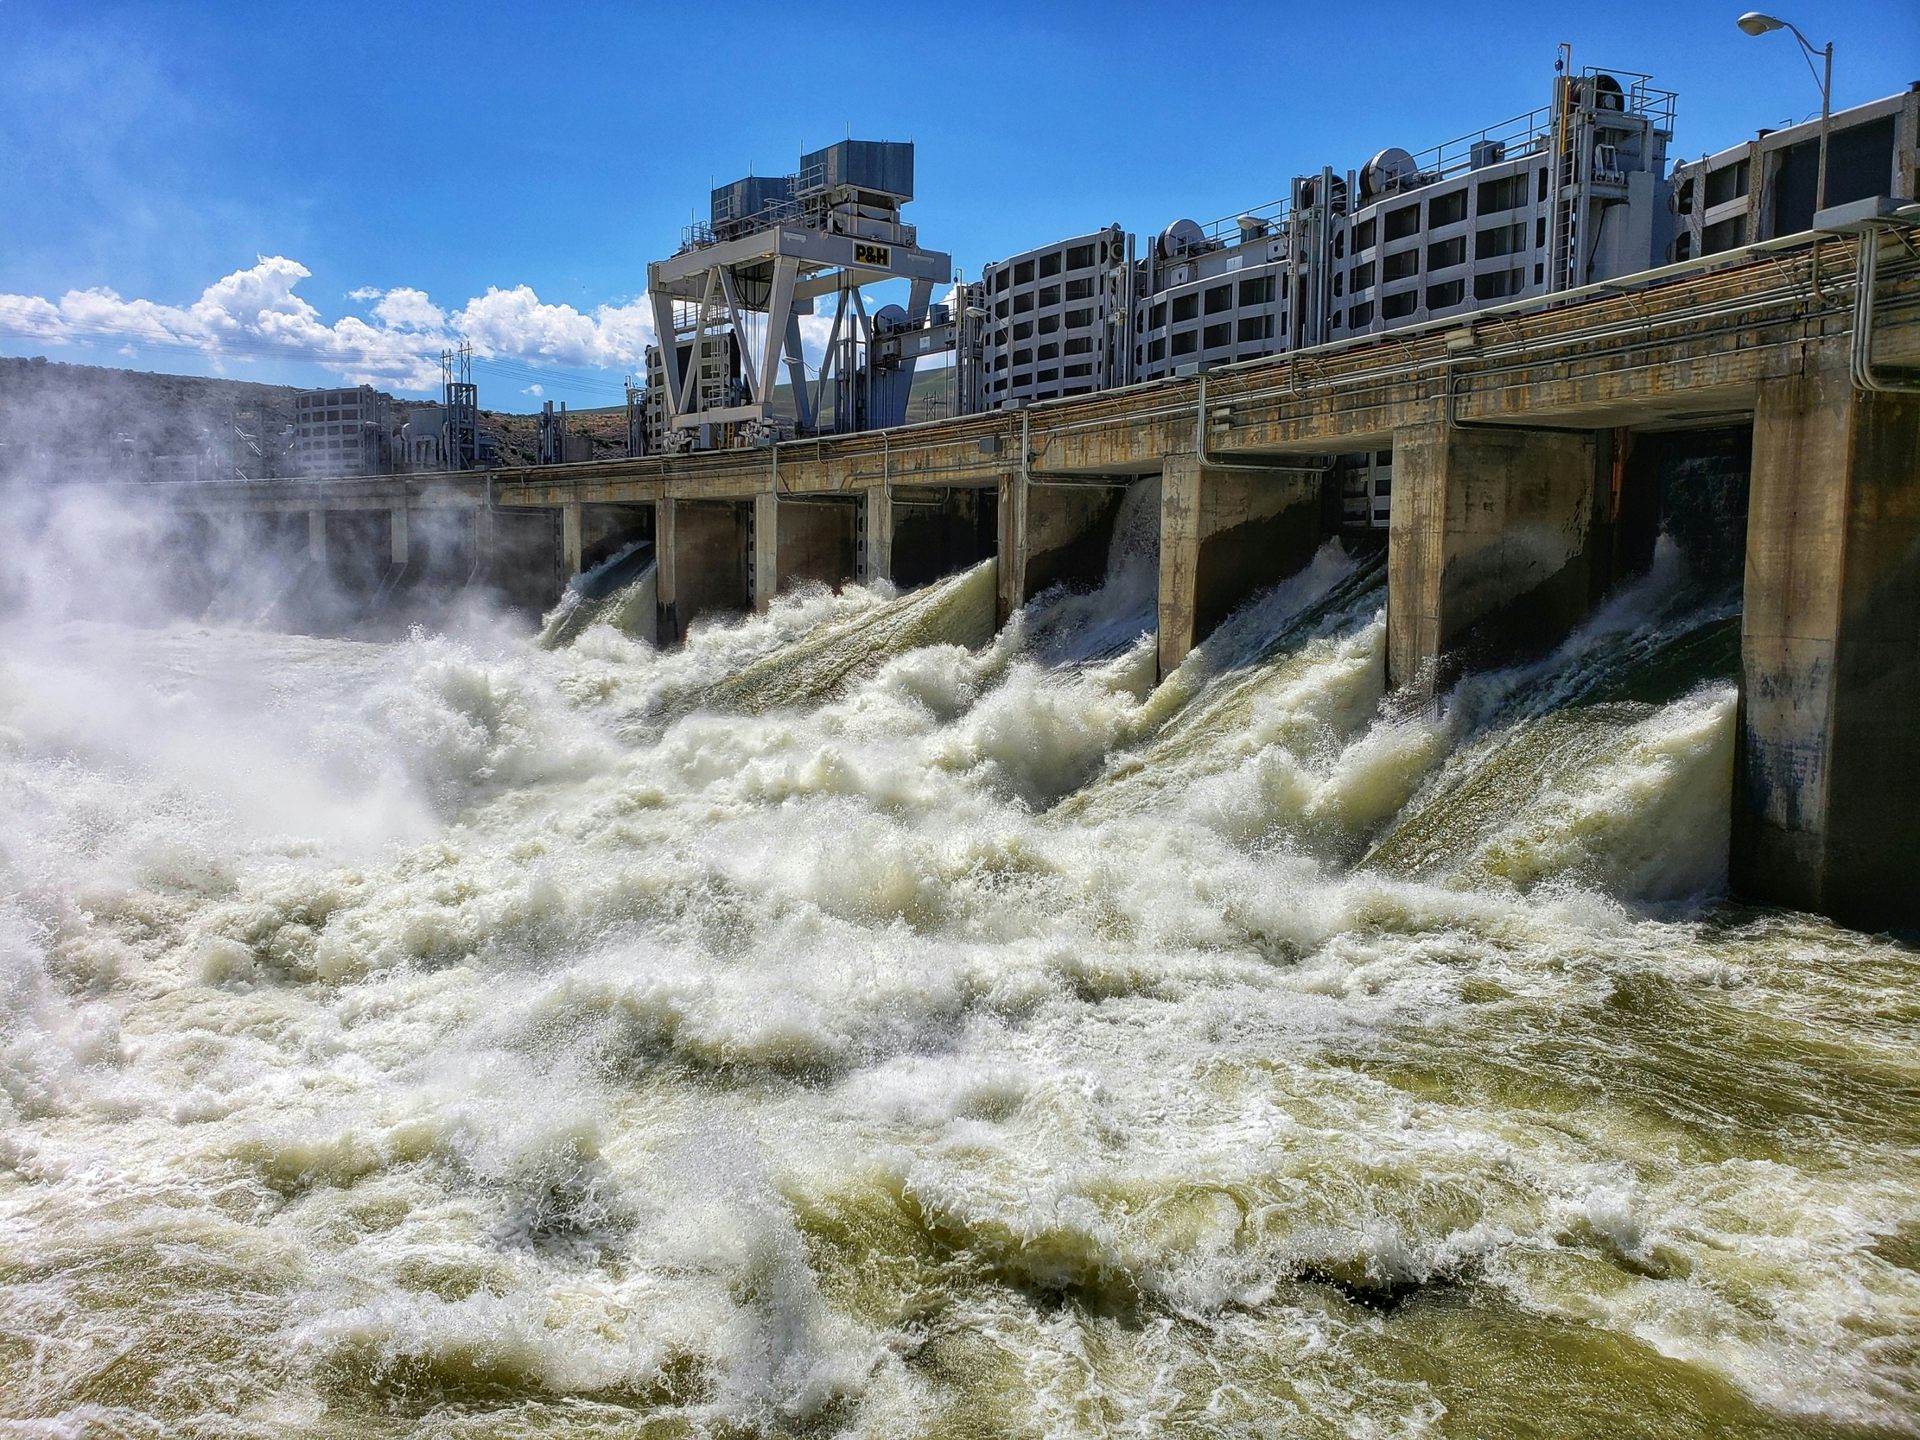 How Well-Managed Dams and Smart Forecasting Can Limit Flooding as Extreme Storms Become More Common in a Warming World